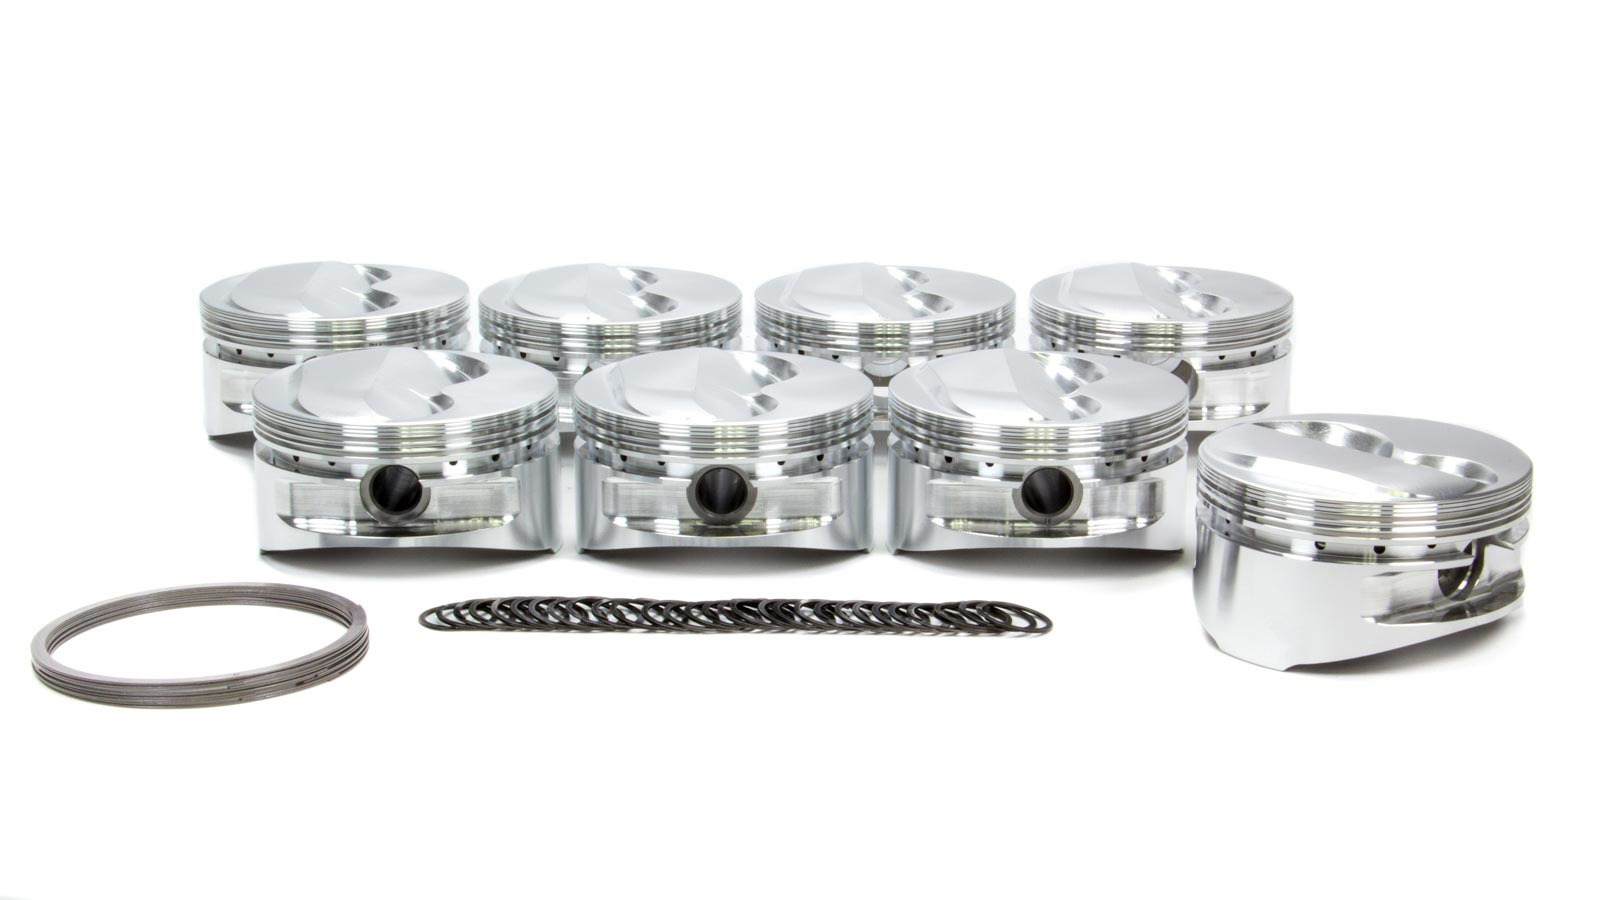 JE Pistons 182036 Piston, Small Block Dome, Forged, 4.155 in Bore, 1/16 x 1/16 x 3/16 in Ring Grooves, Plus 5.60 cc, Small Block Chevy, Set of 8